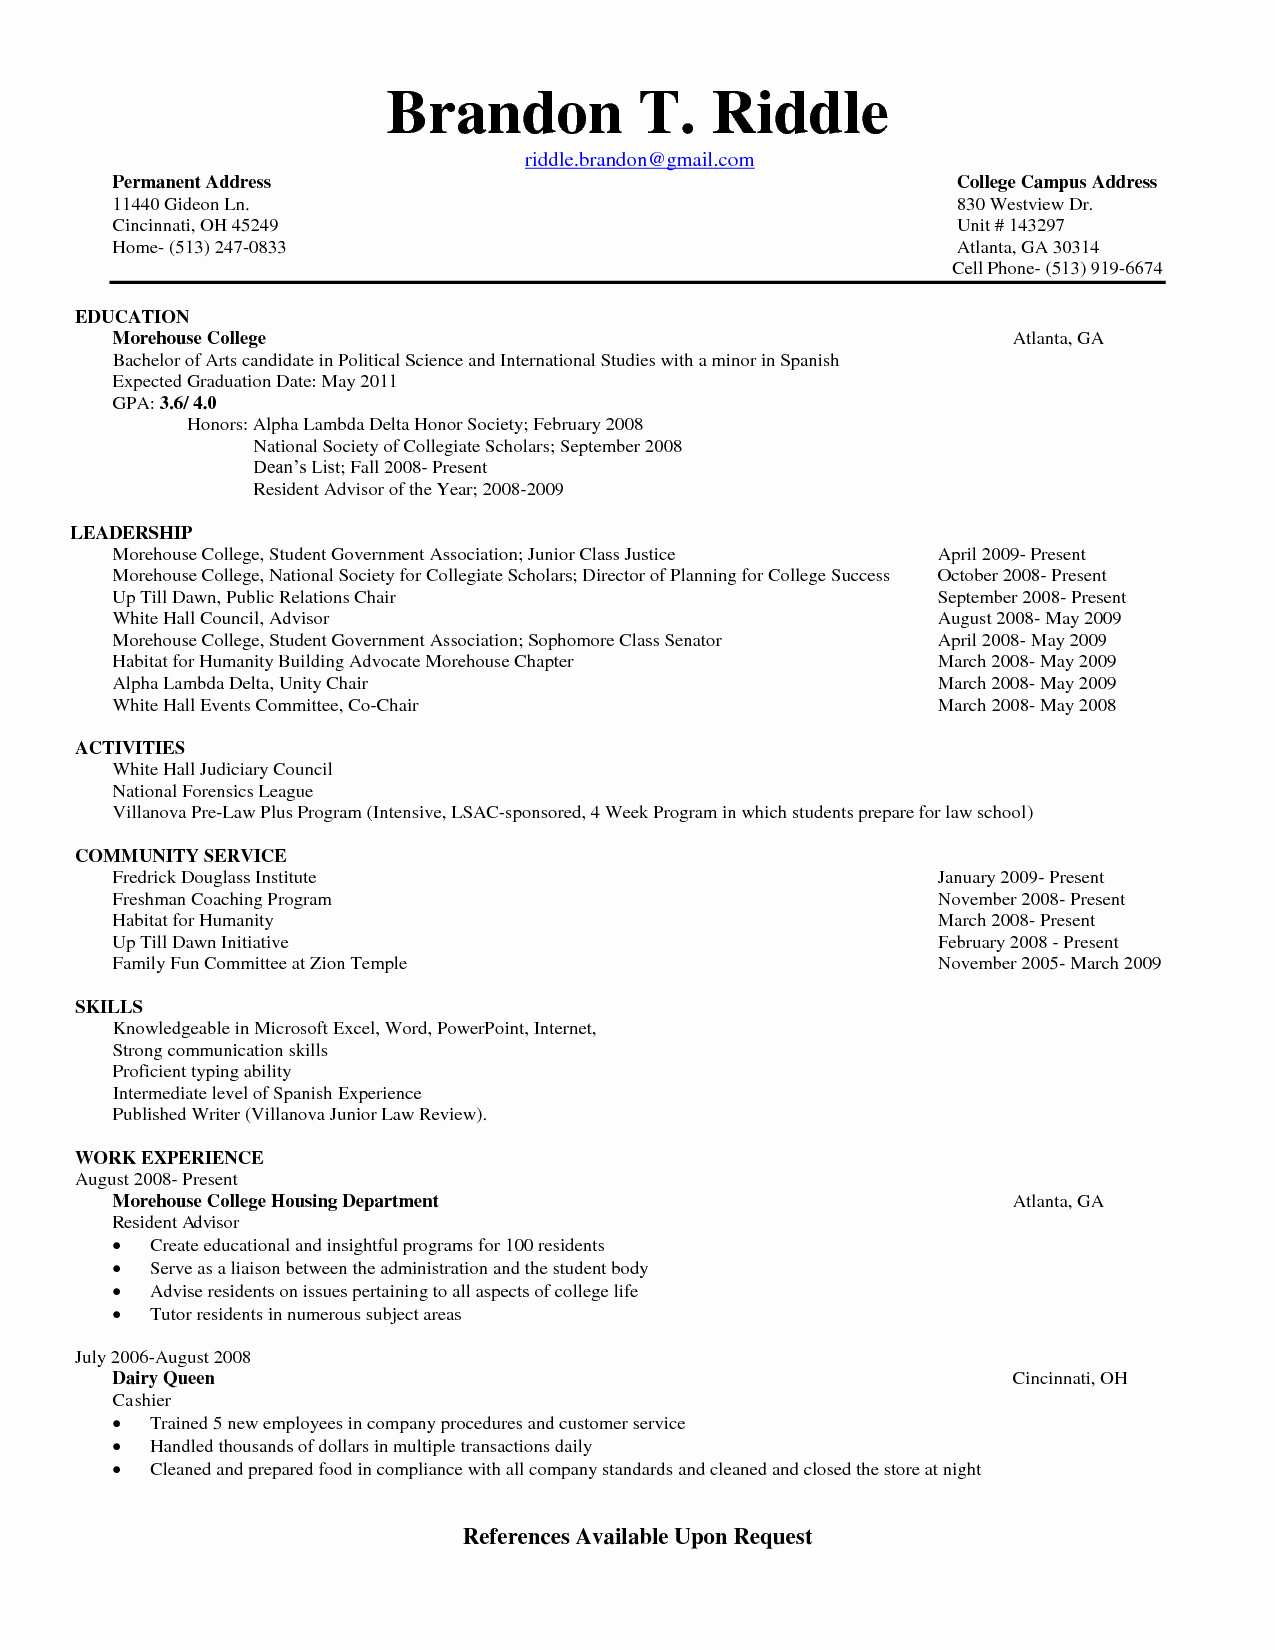 Structure Resume for A Student Resume Ideas